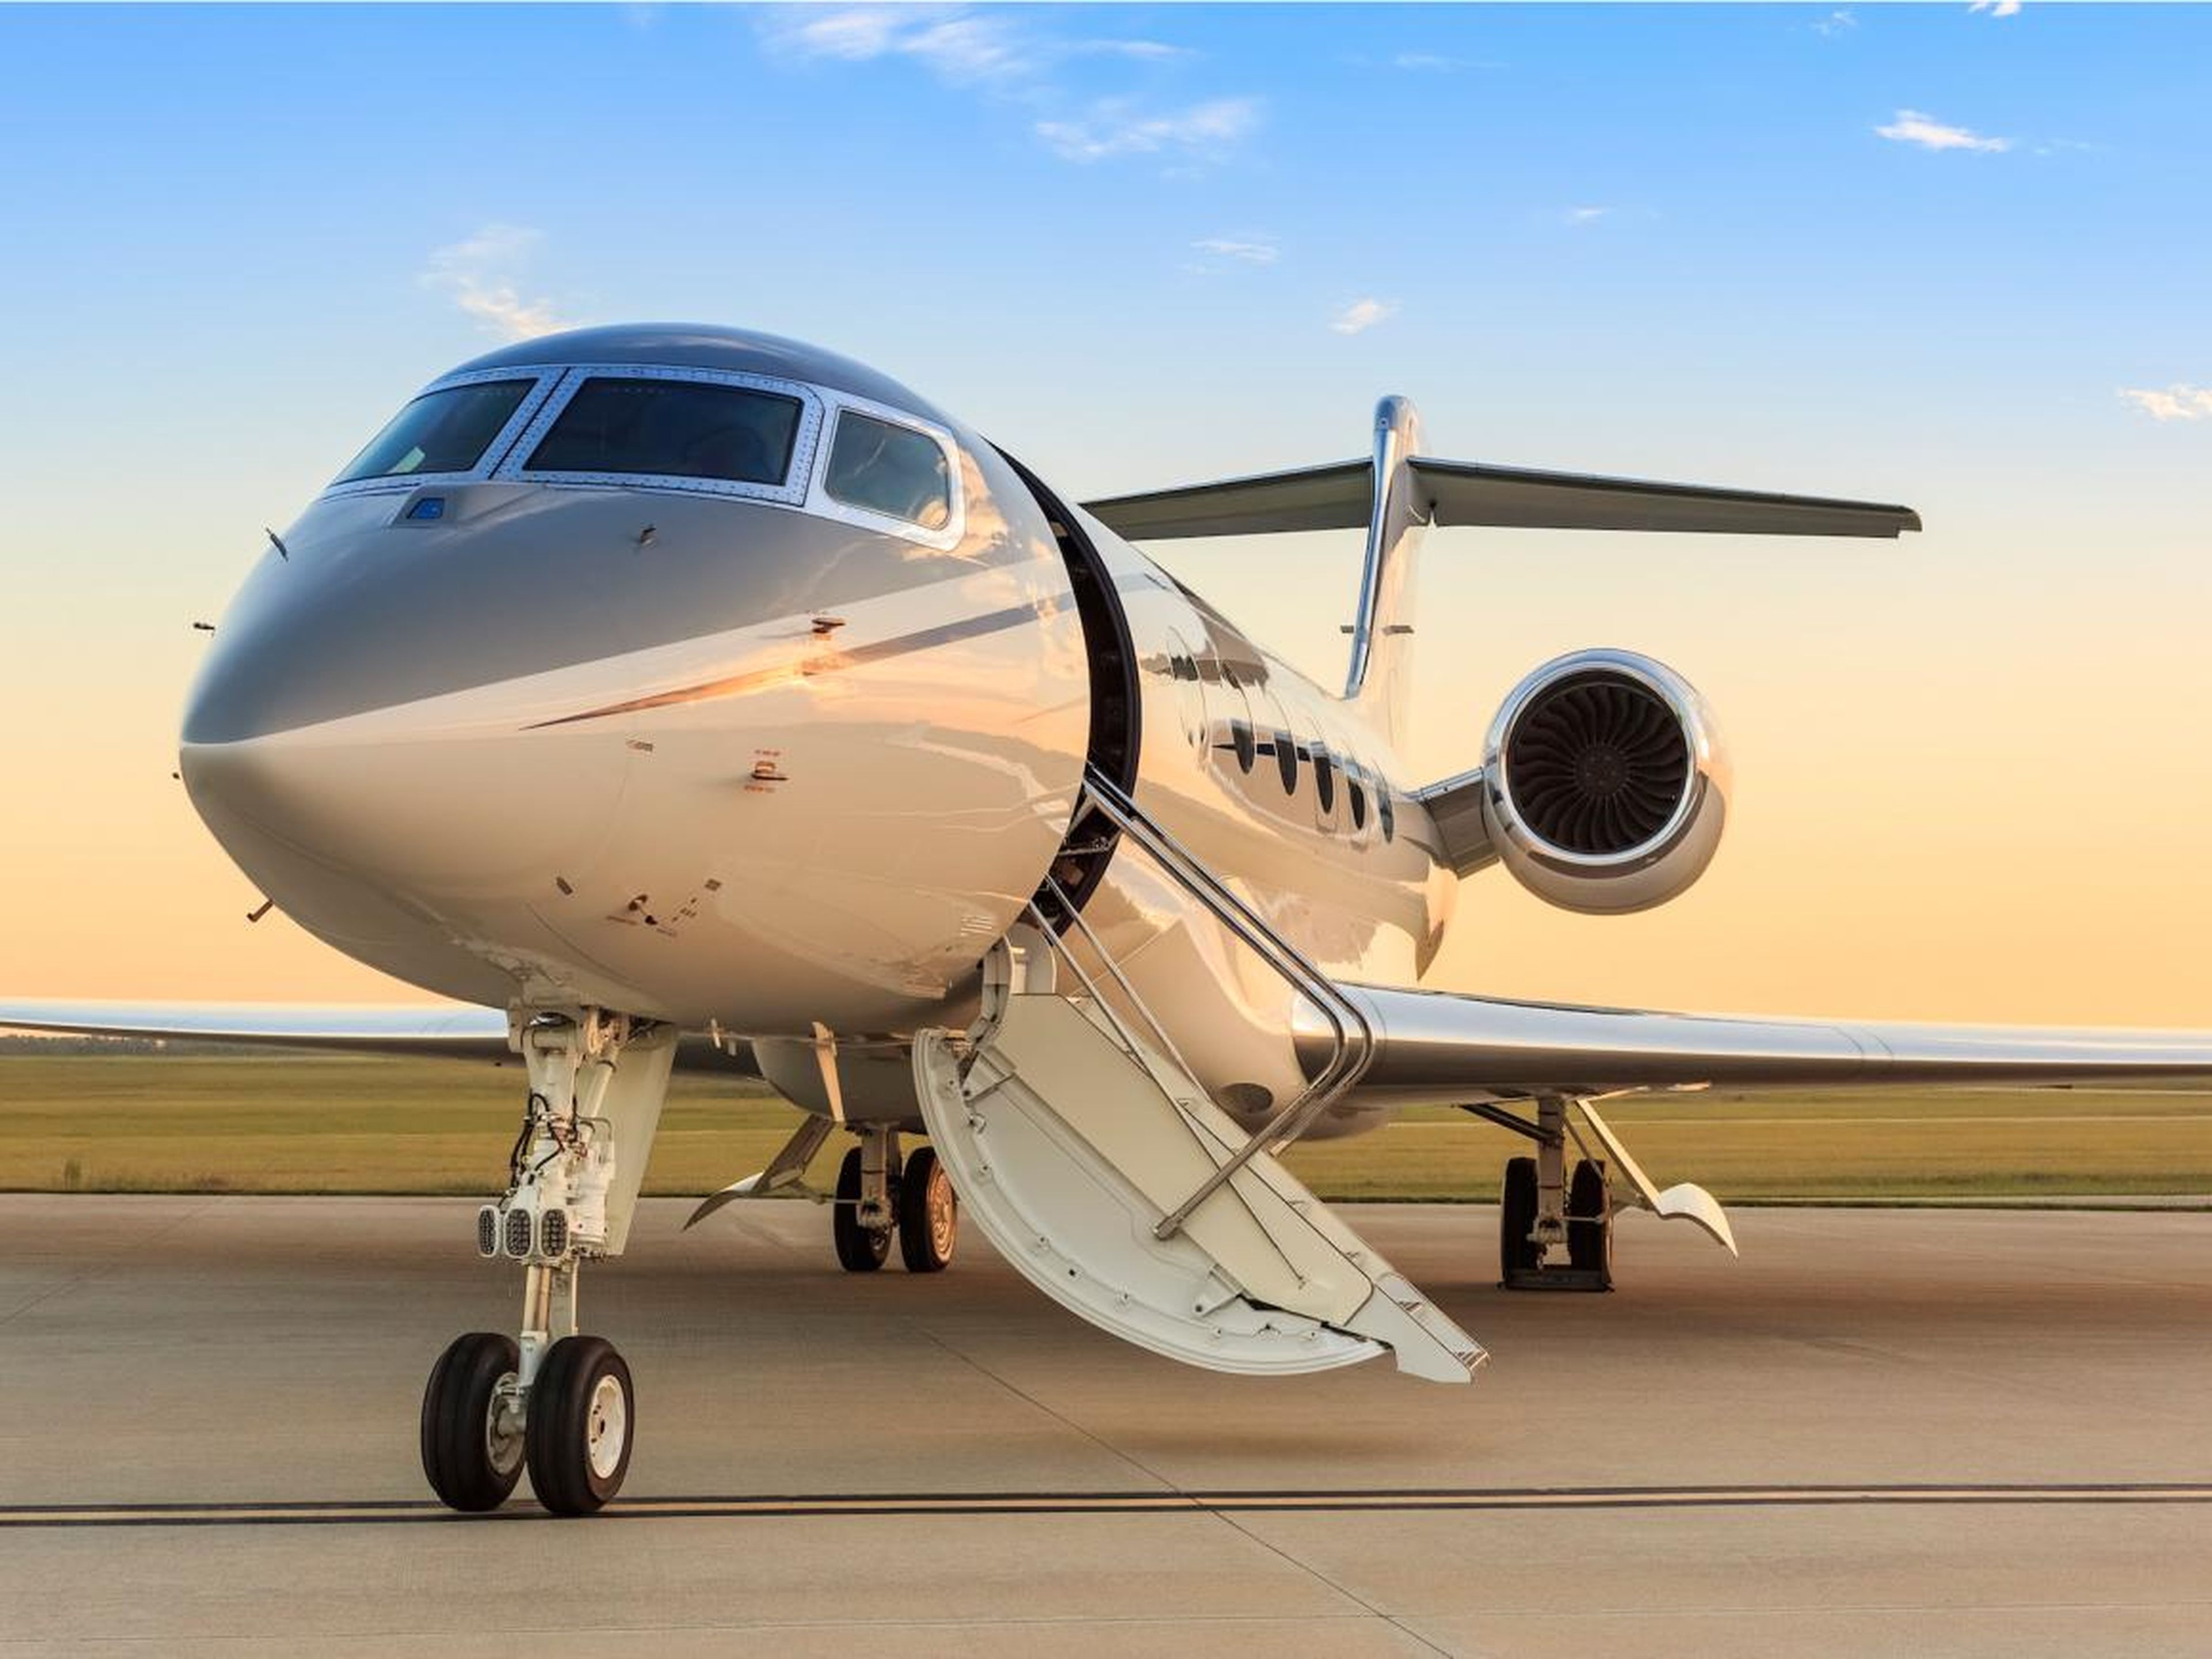 2. Gulfstream G500: At $44 million, the G500 isn't Gulfstream's most expensive offering, but it is the newest. It's expected to enter service later this year.